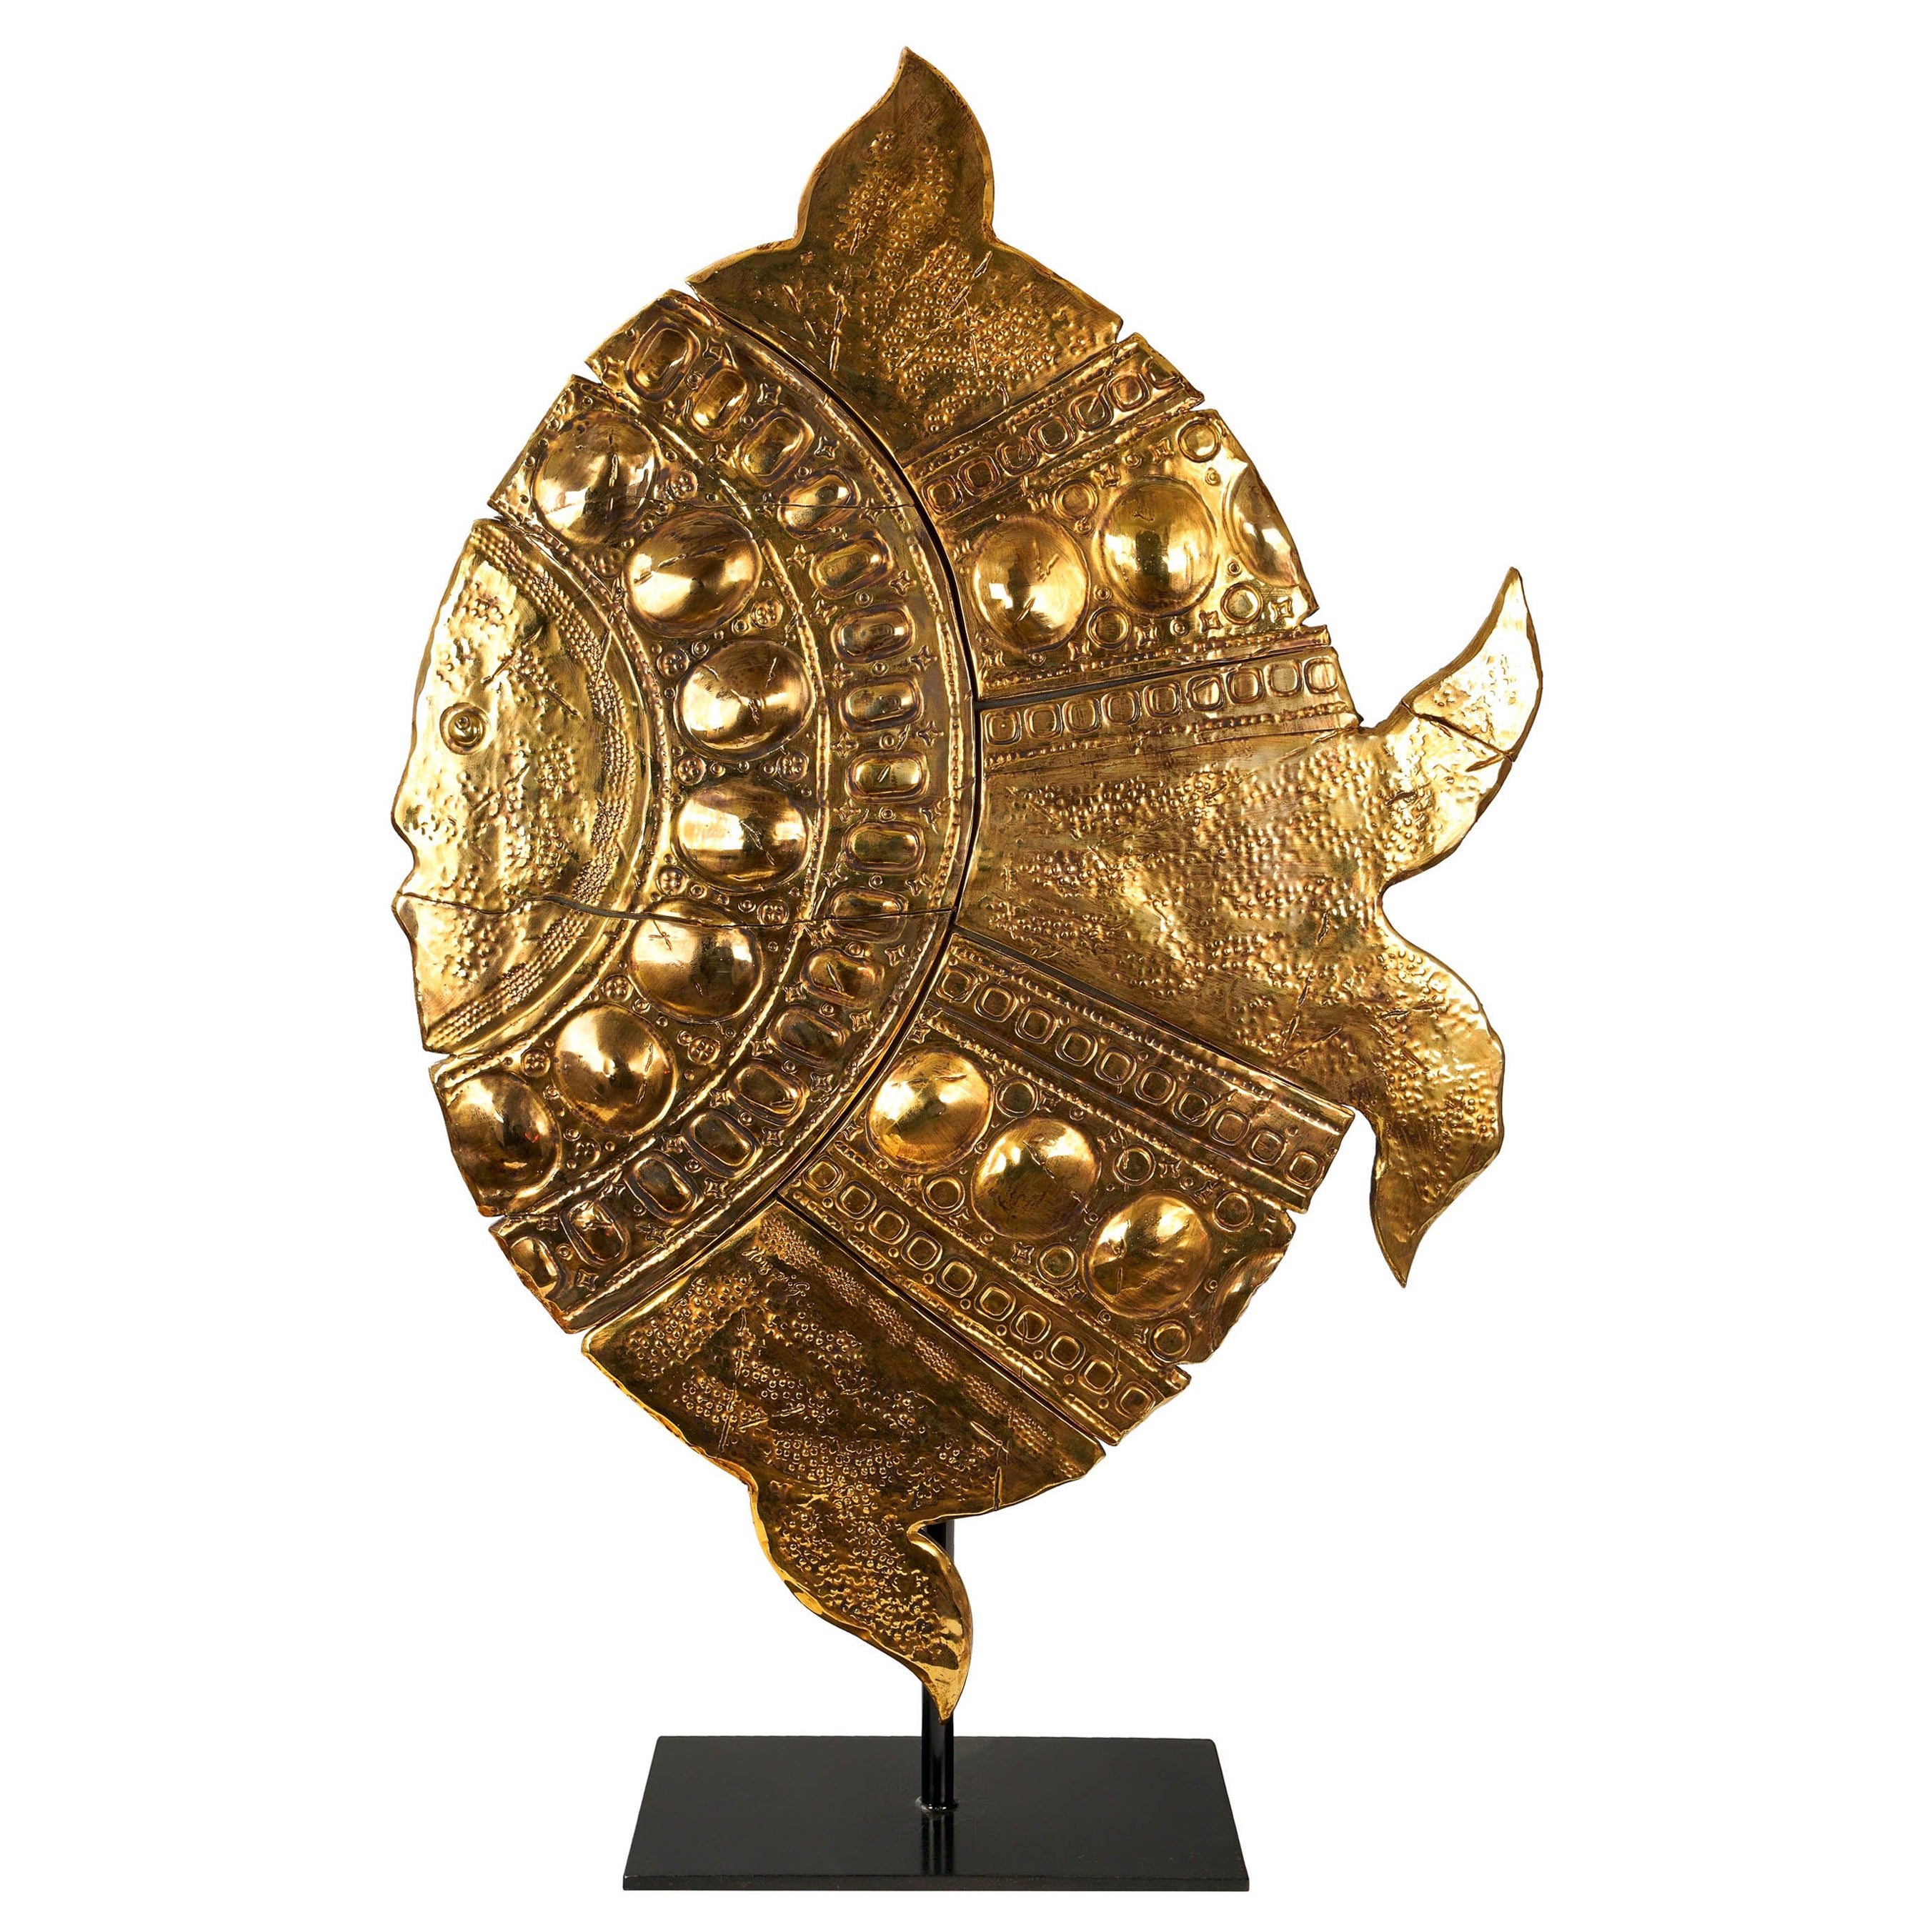 Ceramic sculpture handmade in Italy and decorated with the luster technique in 24Kt gold. The sculpture is mounted on a black painted wooden panel fixed to an adjustable black painted metal pedestal. Upon request, we can remove the easel and make